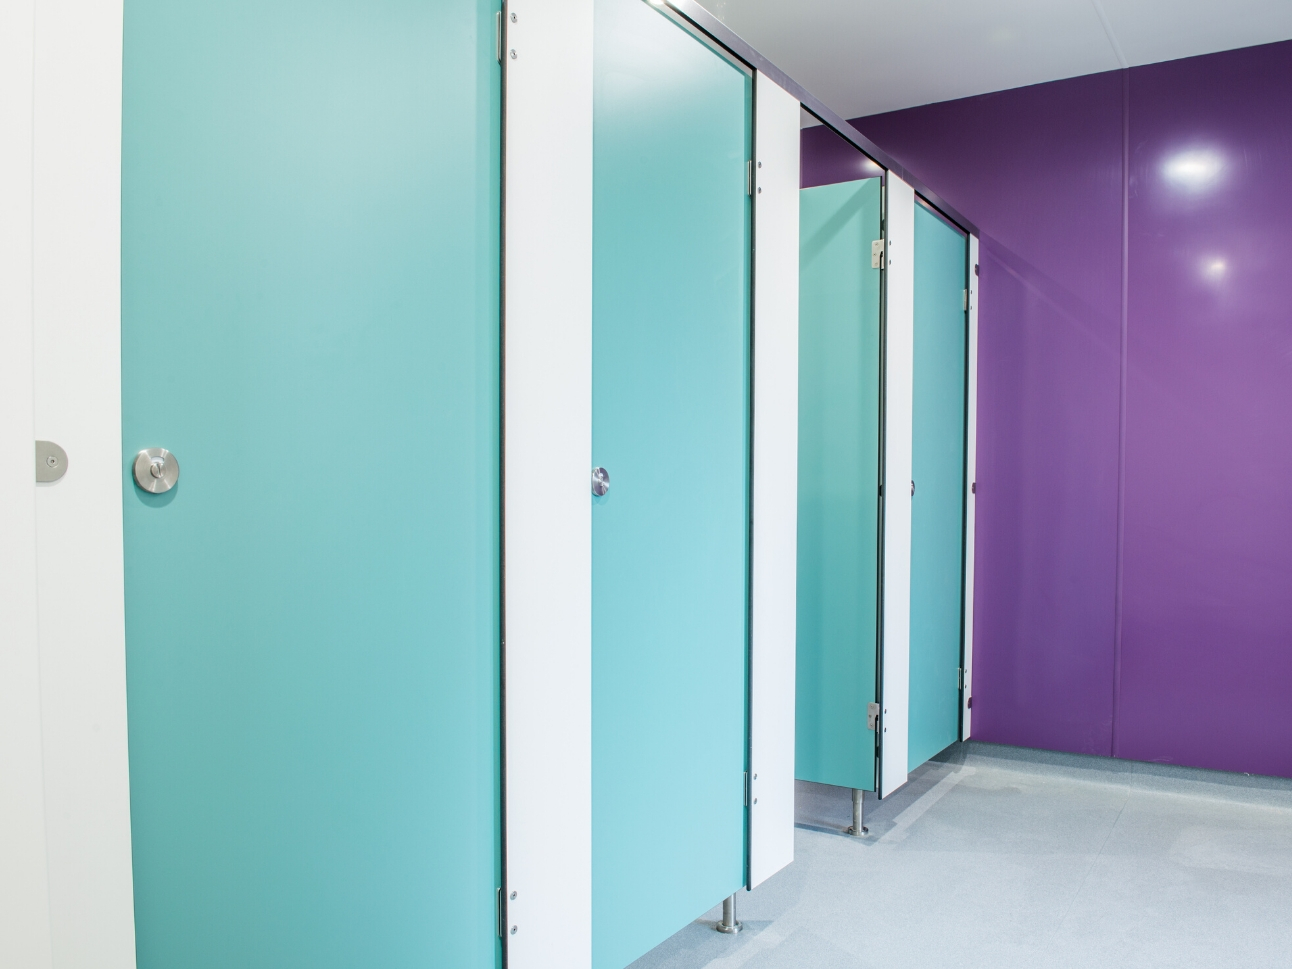 Altro installation recognition award for LVS Ascot washroom project